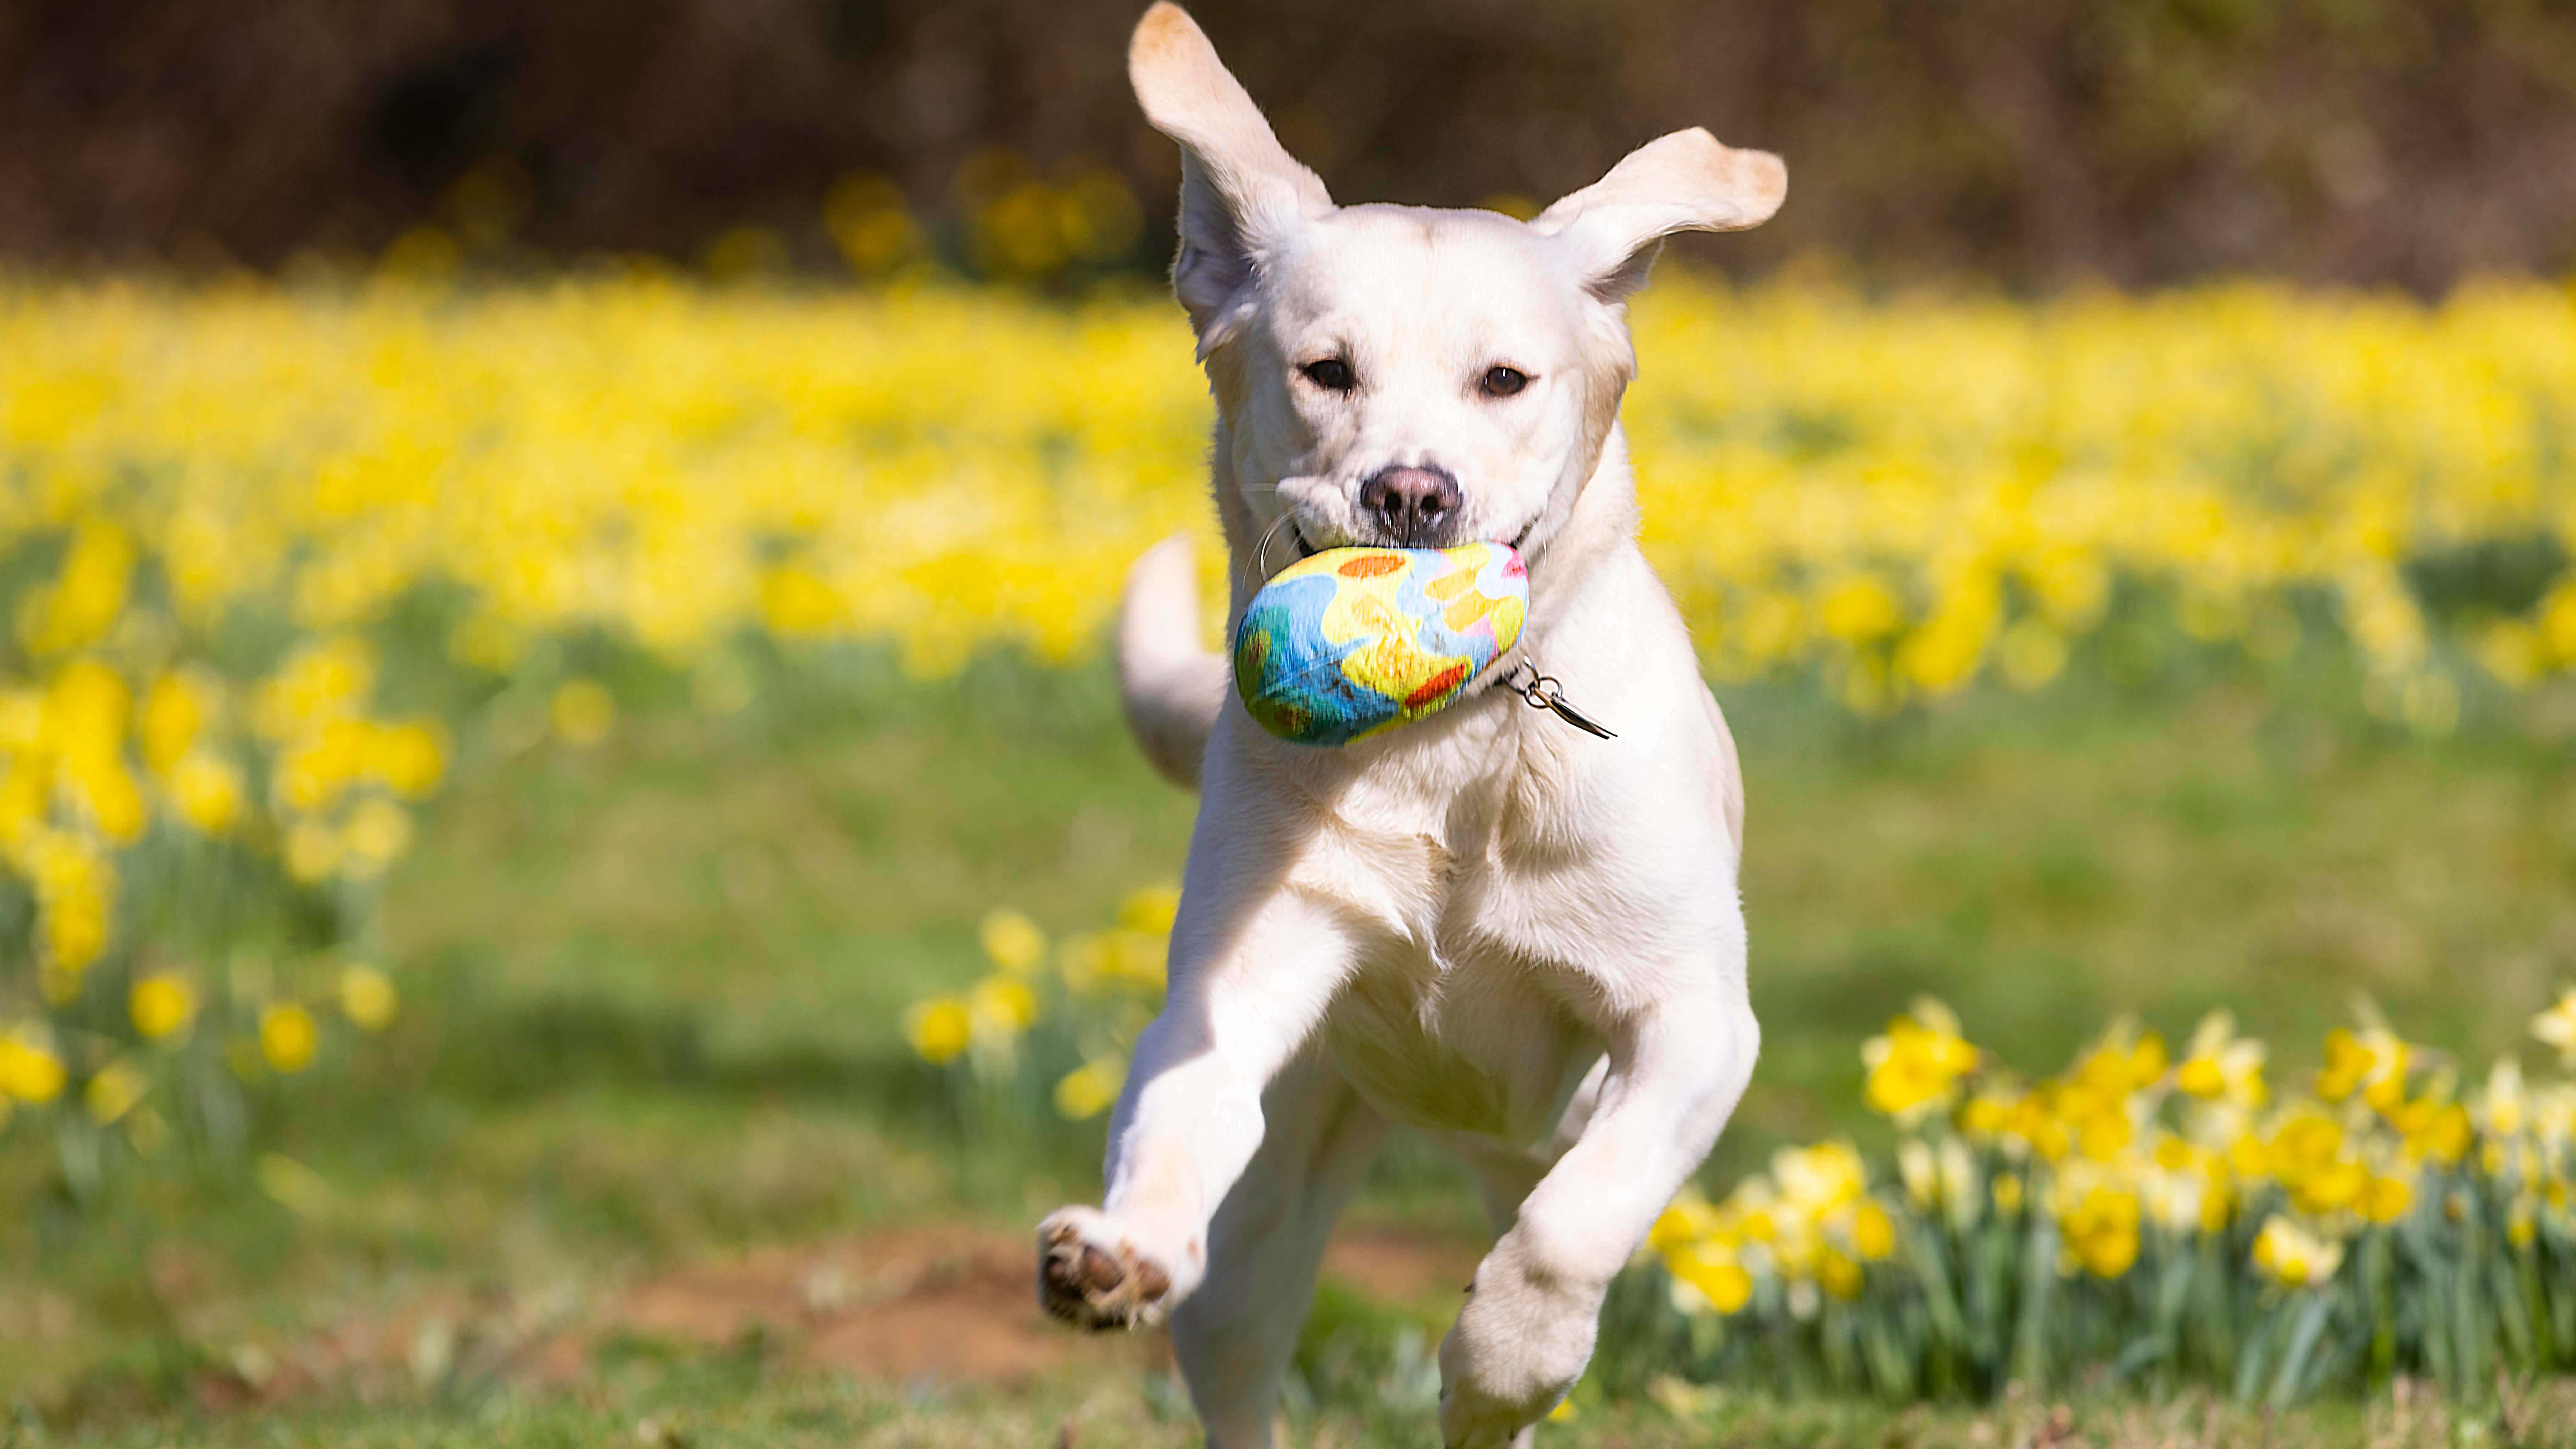 Yellow Labrador guide dog puppy Sunny carries soft Easter egg toy and jumps towards the camera. A field of yellow daffodils is in the background.